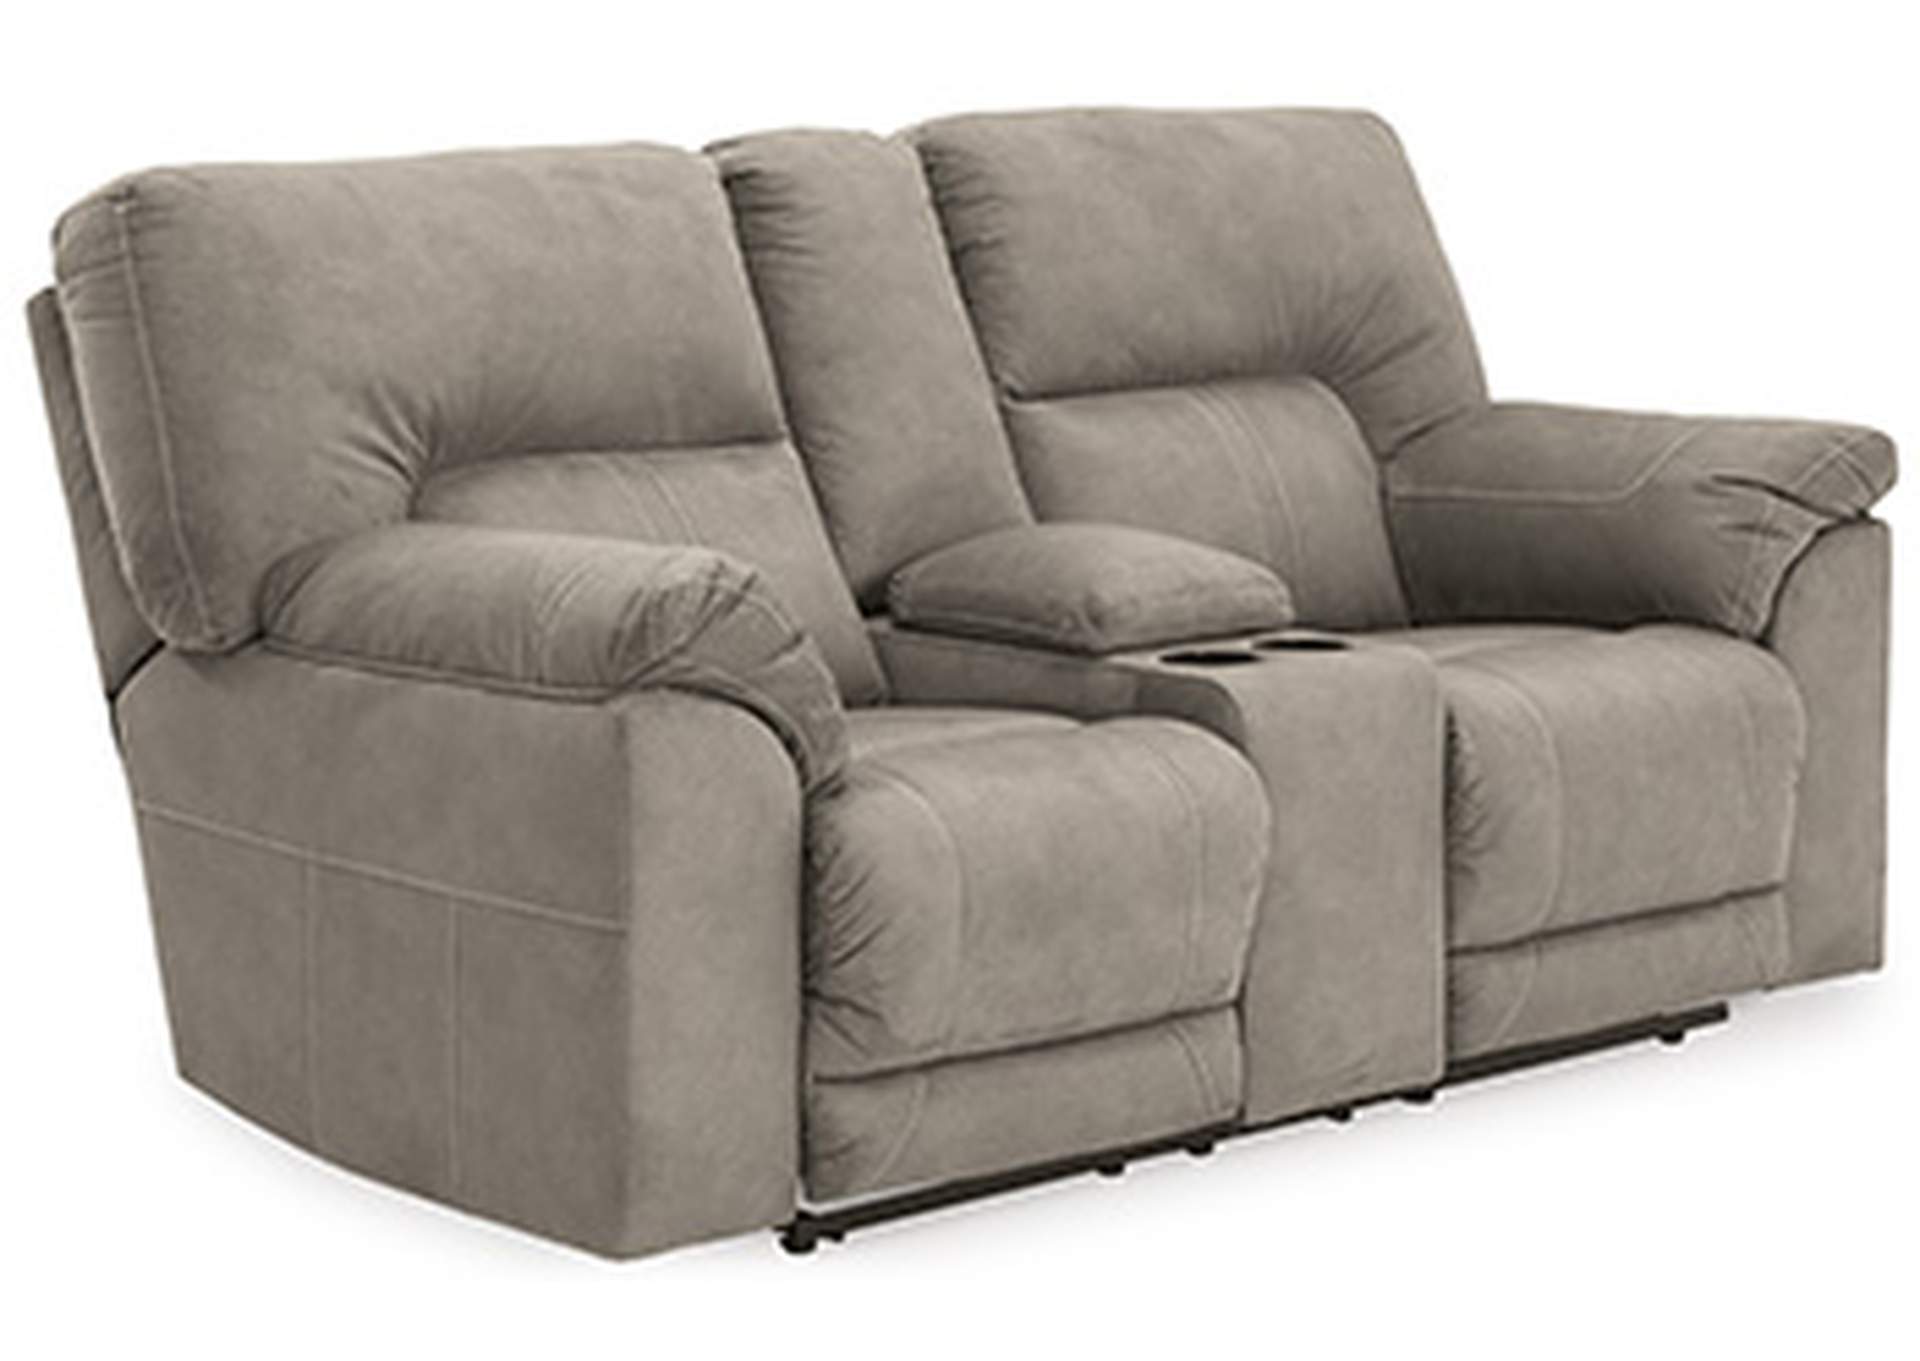 Cavalcade Reclining Loveseat with Console,Benchcraft